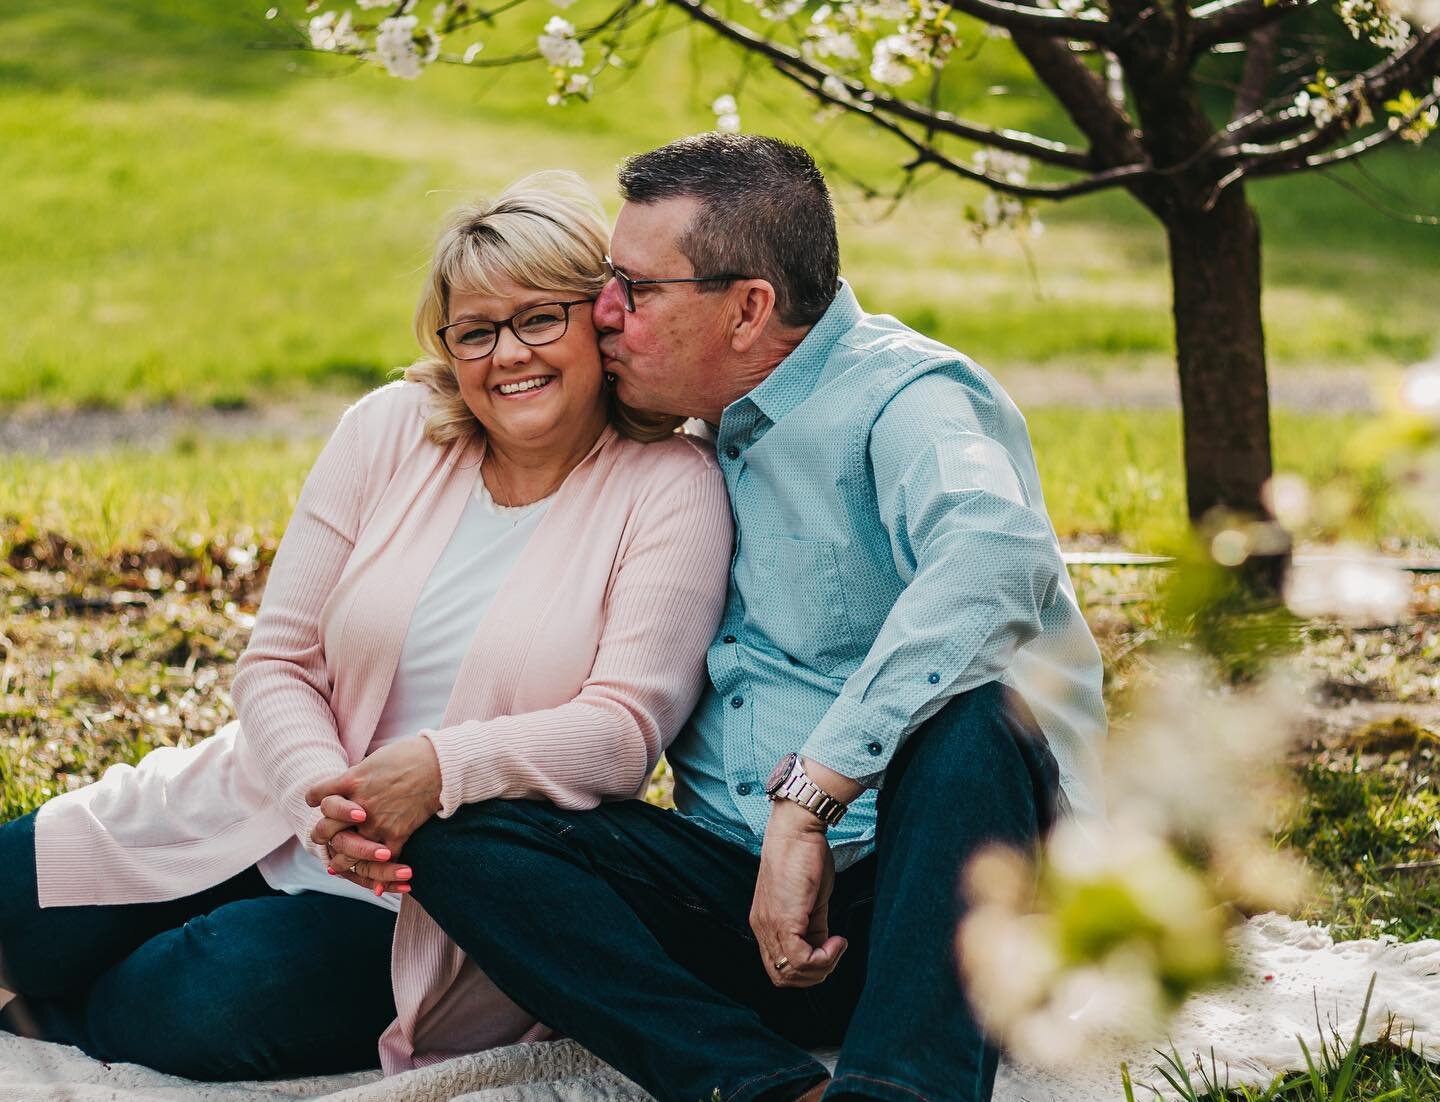 young love 🌸❤️
.
.
.
.
.
.
.
.
#westmichiganphotographer #westmichiganphotography #familyphotography #grandrapids #grandrapidsmichigan #robinettes #robinettesapplehaus #grandrapidsphotographer #familyphotographer